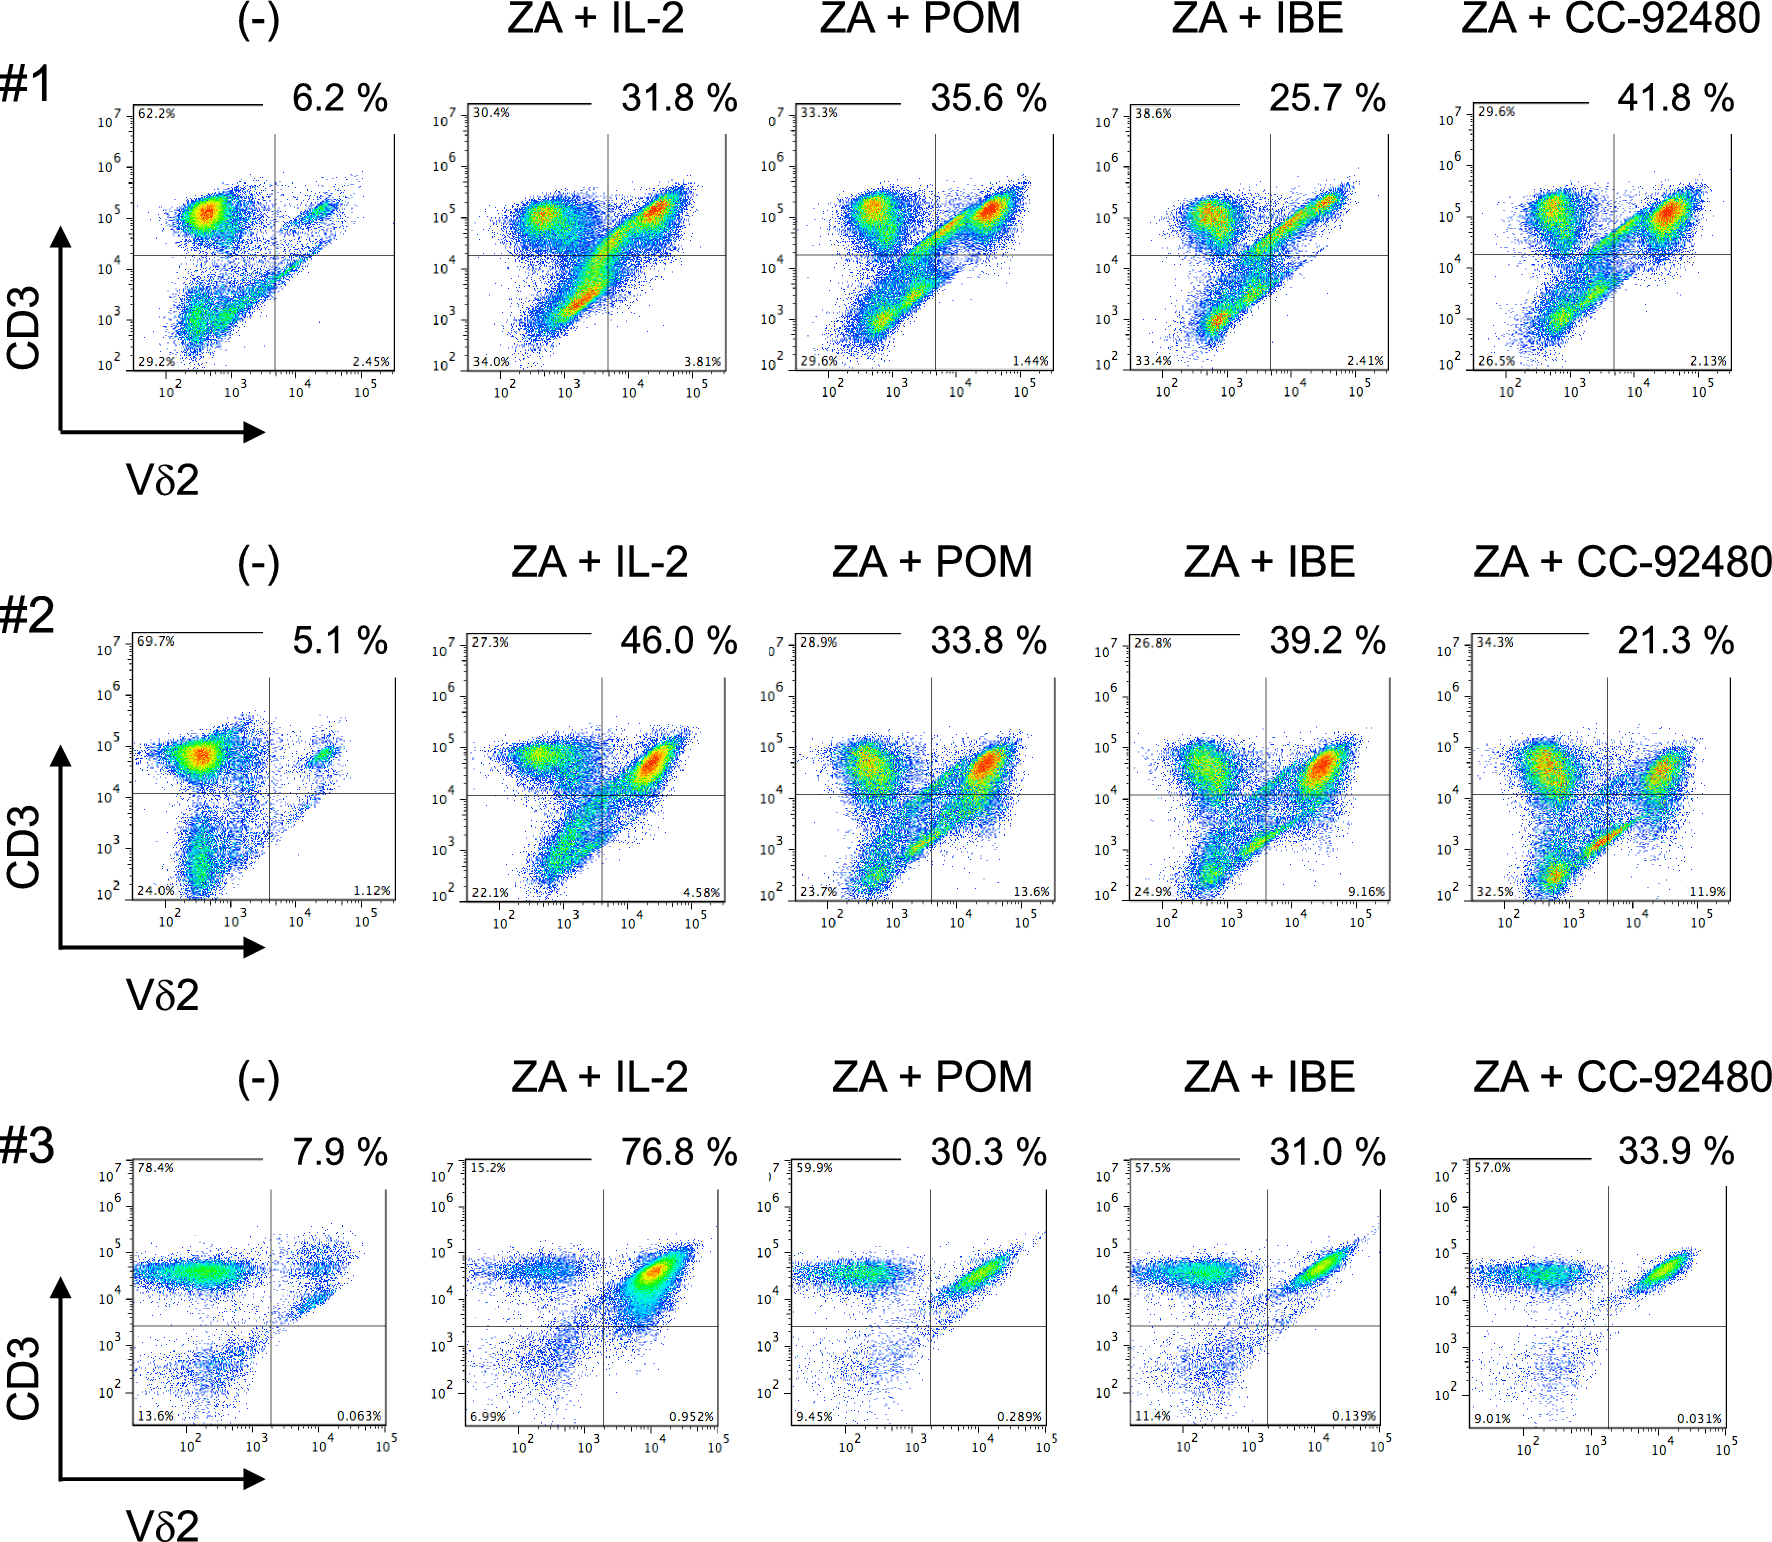 Ex vivo expansion and activation of Vγ9Vδ2 T cells by CELMoDs in combination with zoledronic acid